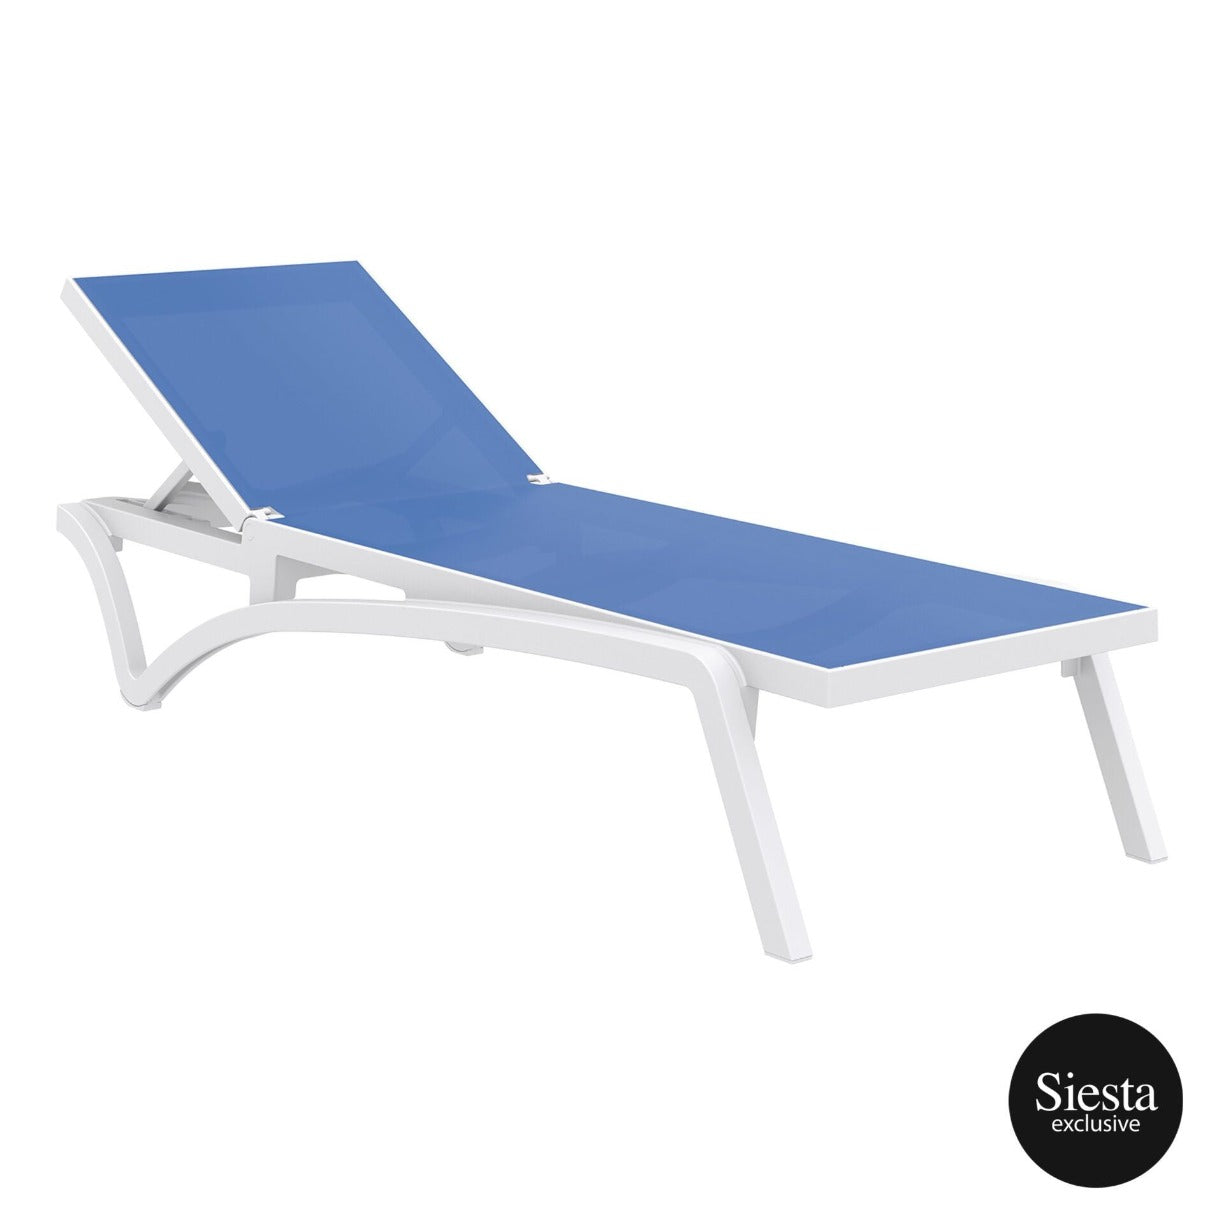 Pacific Sunlounger